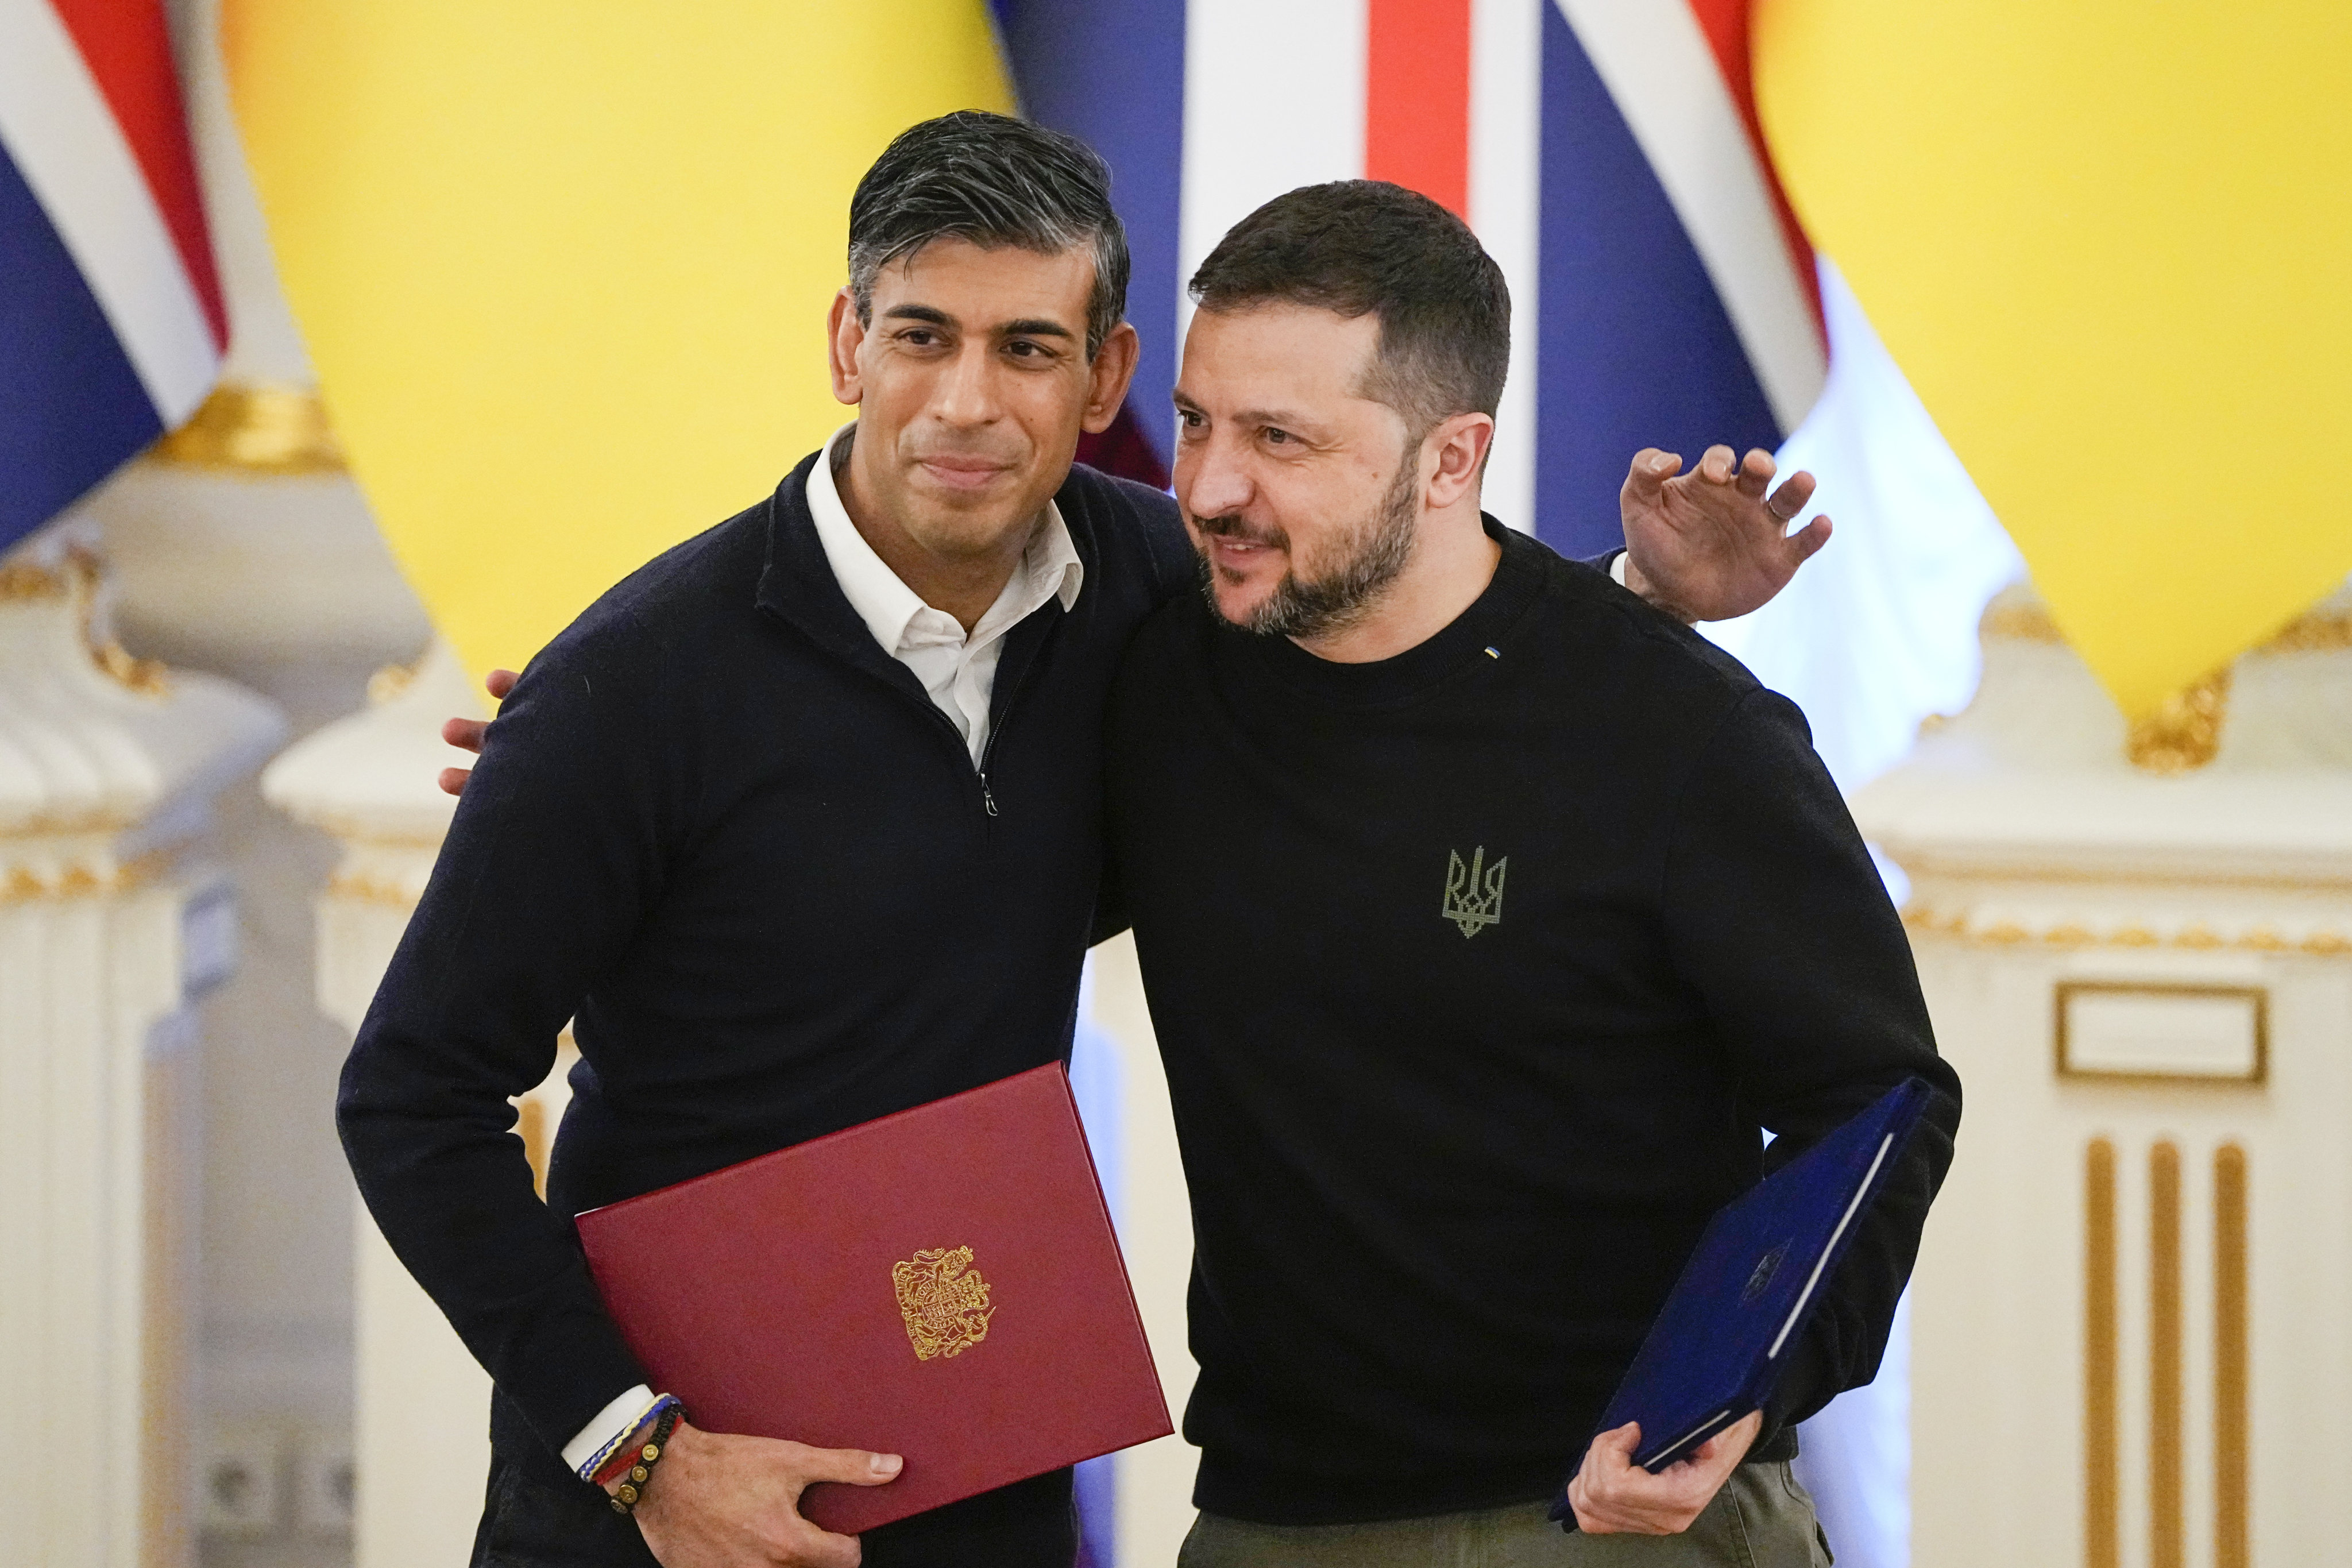 UK Prime Minister Rishi Sunak pledged more than US$3 billion in aid to Ukraine amidst a meeting with President Volodymyr Zelensky in Kyiv on Friday. Photo: AP